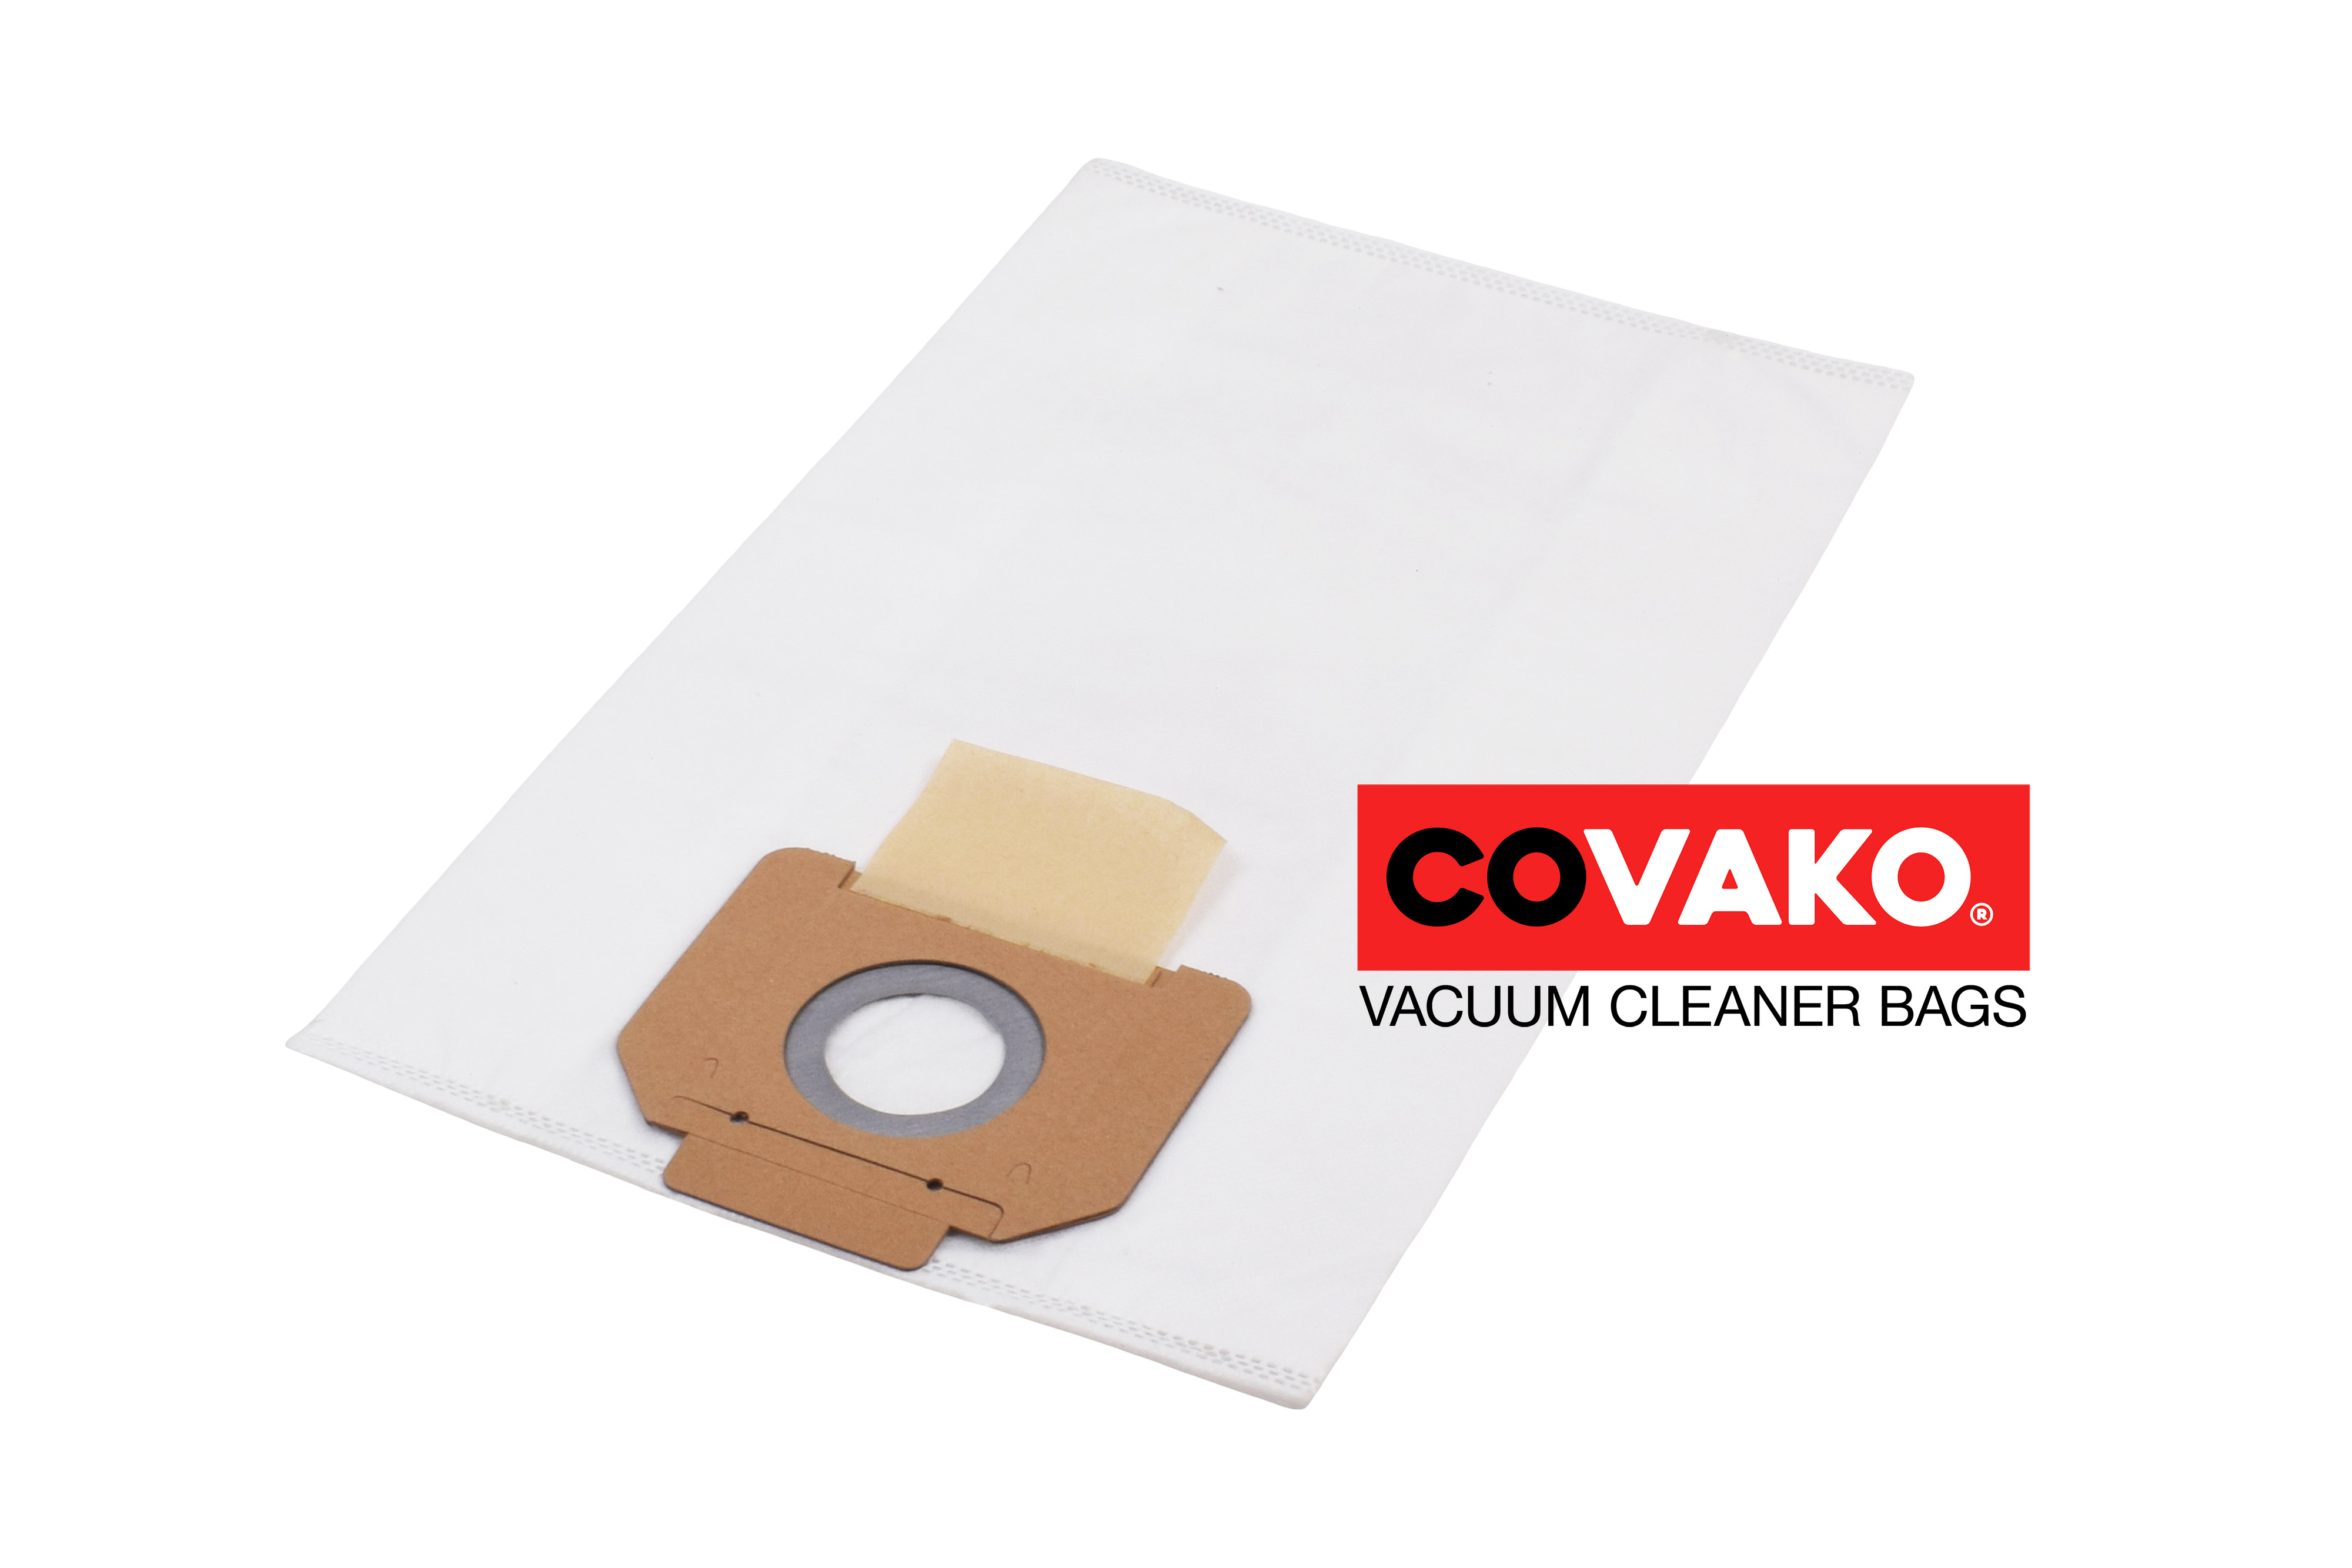 ICA GP 1/16 Dry / Synthesis - ICA vacuum cleaner bags